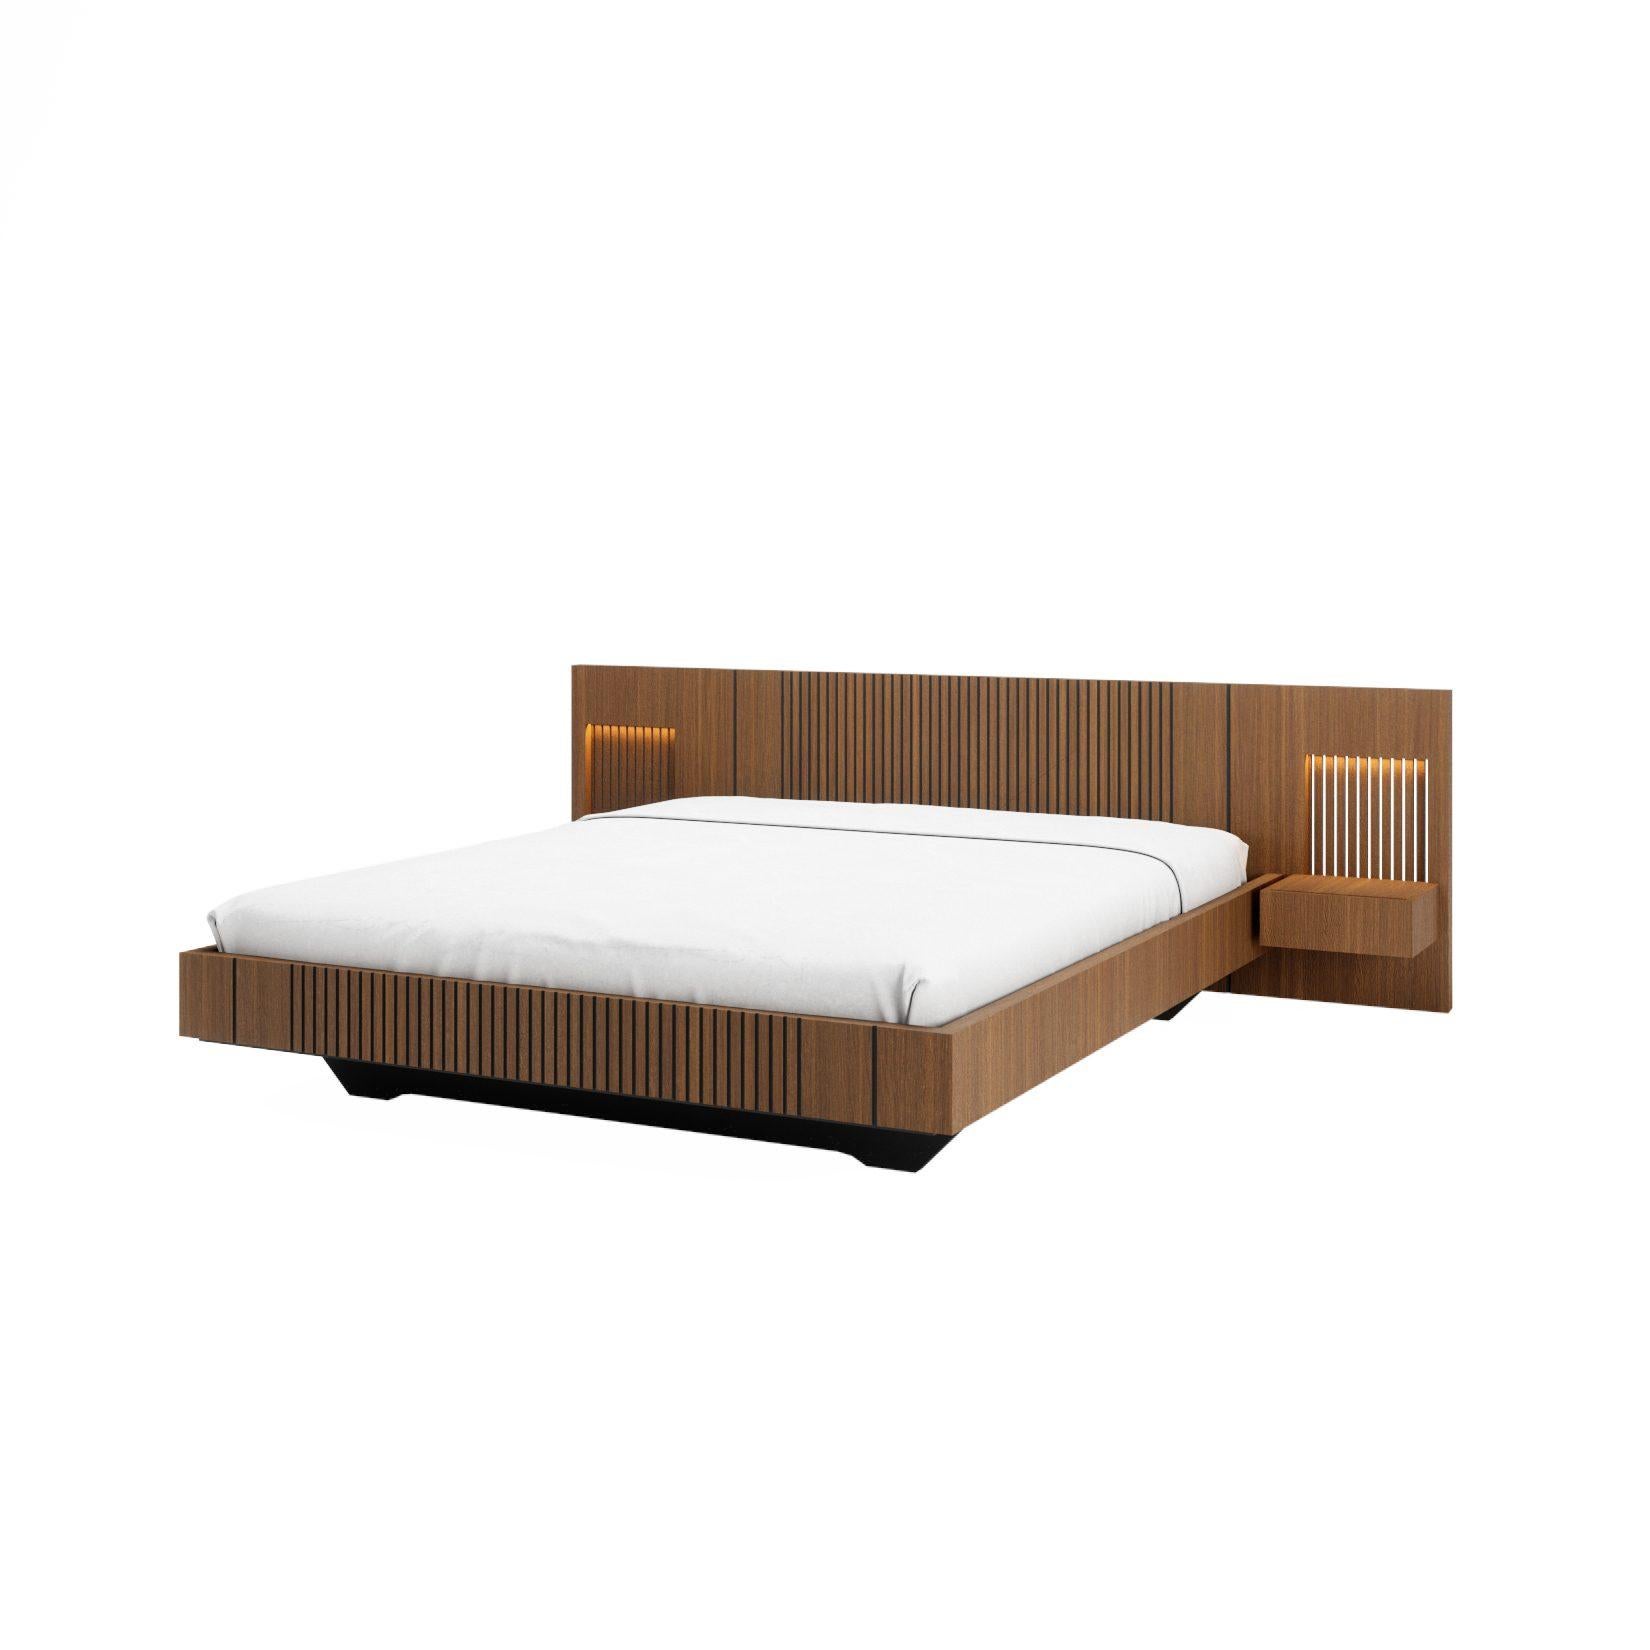 *Collection not sold in France, exclusive to Mobilier de France.*

Woodtale Piana Bed from Cacio with headboard and 2 drawers without Leds.

The Piana collection is one of Cacio's bestsellers, with Scandinavian inspiration, this line is available in